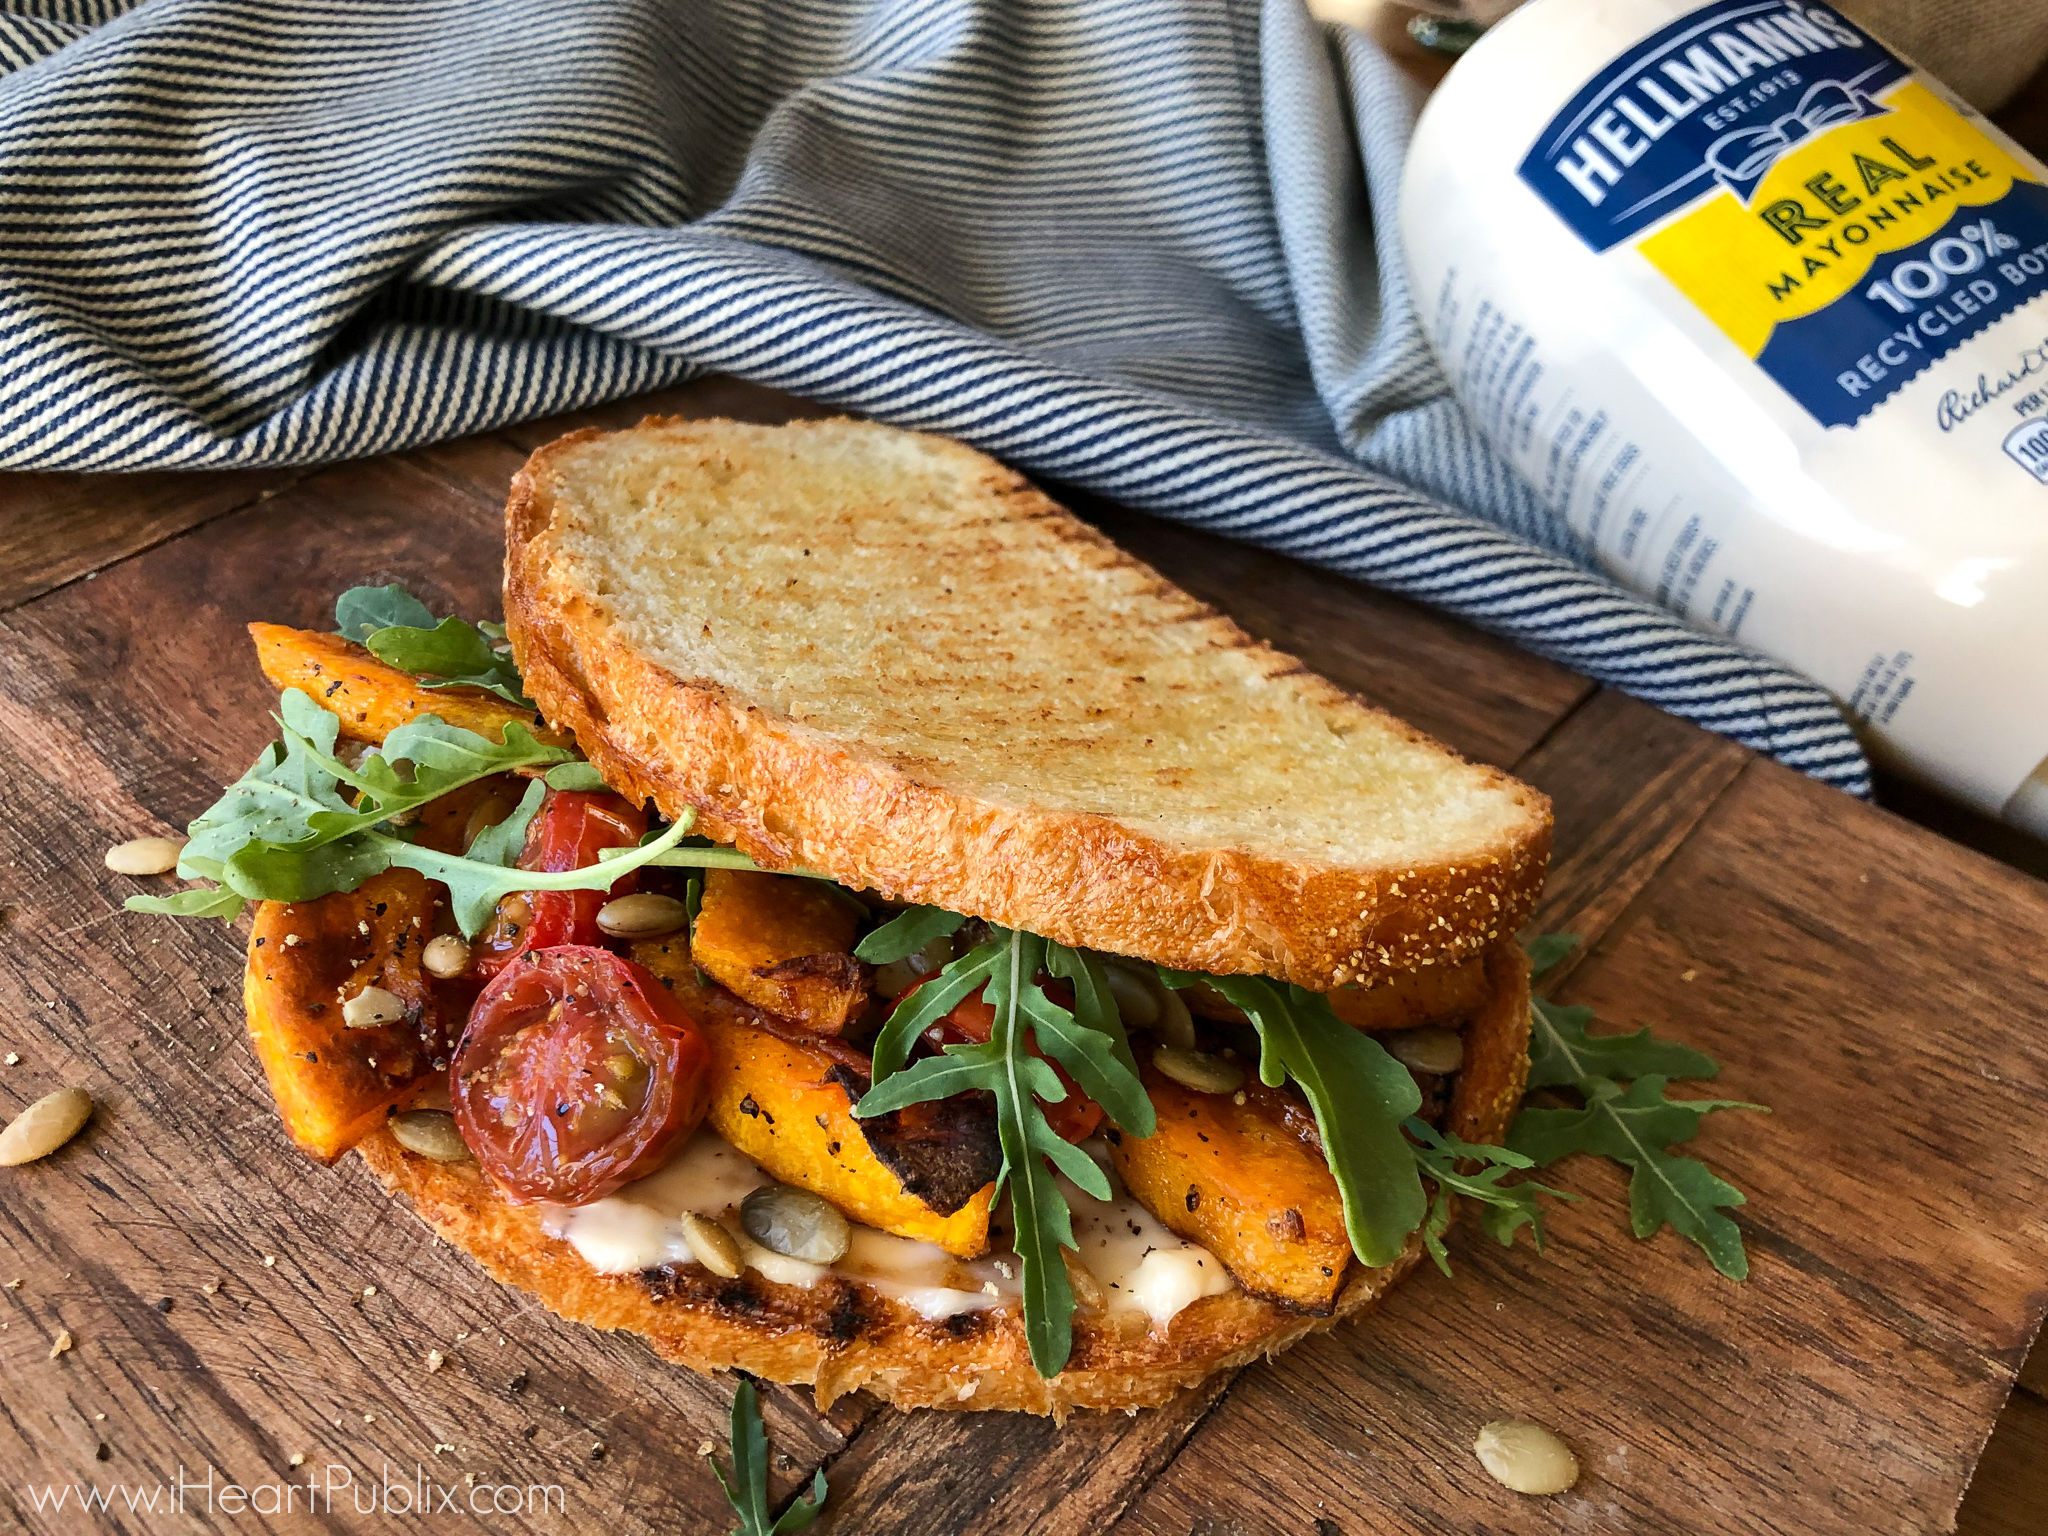 This Rustic Roasted Pumpkin Sandwich Is The Better-For-You Meal That You'll Love on I Heart Publix